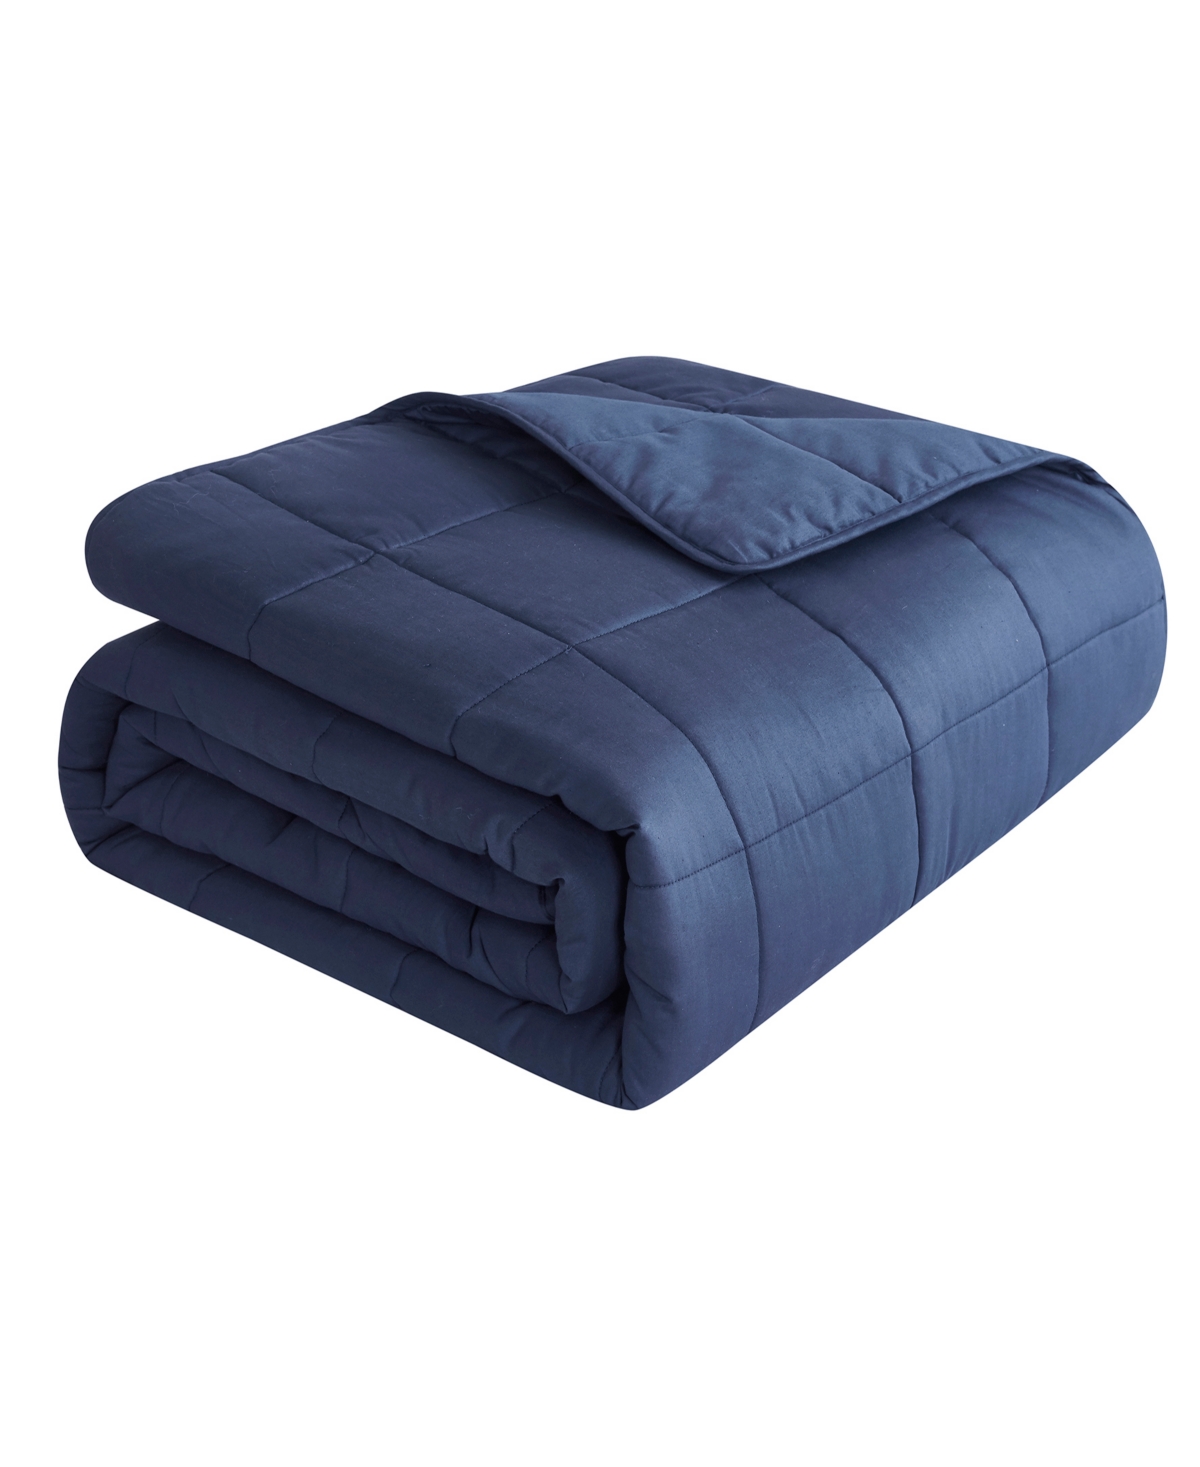 Dream Theory Cotton Weighted 5 Lbs Blanket, One Size Bedding In Navy